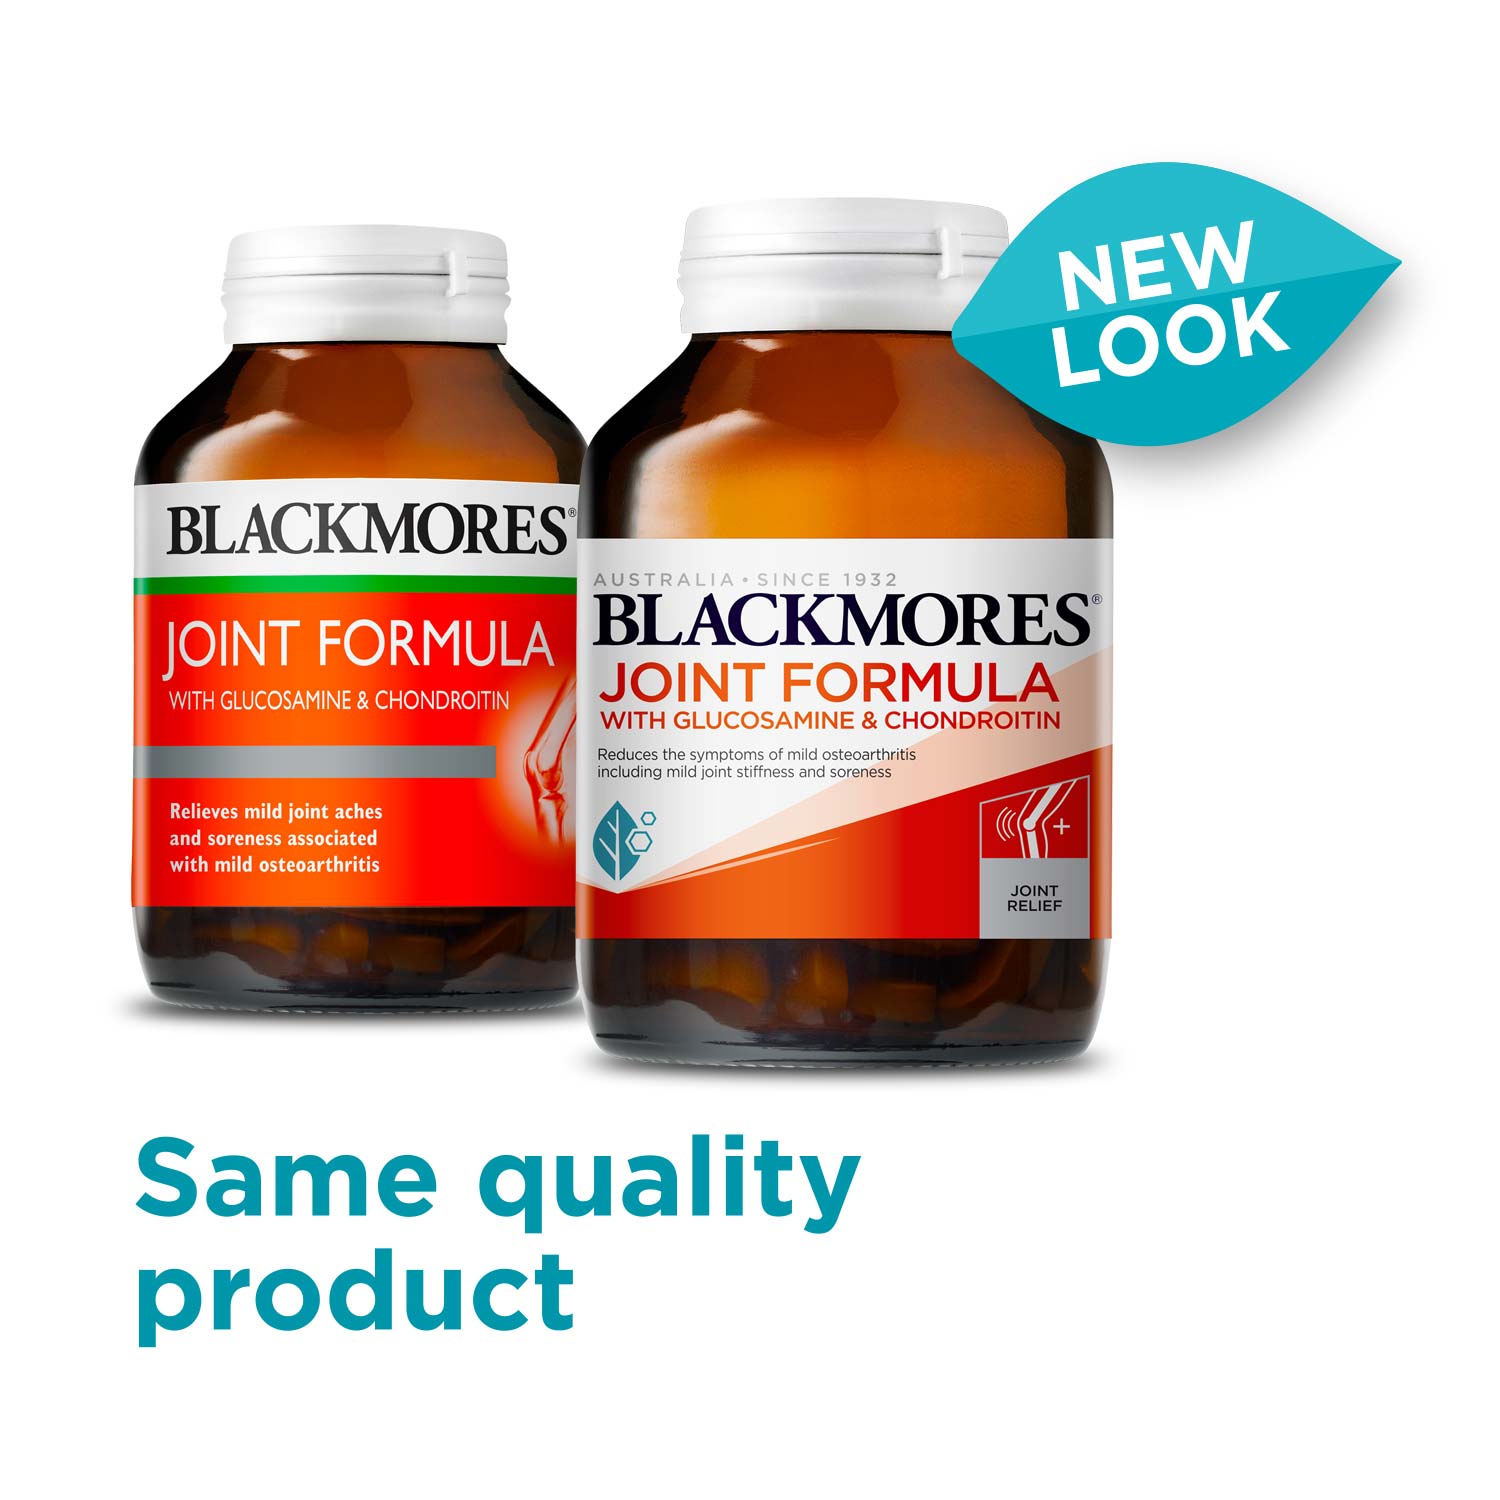 Blackmores Joint Formula new look label